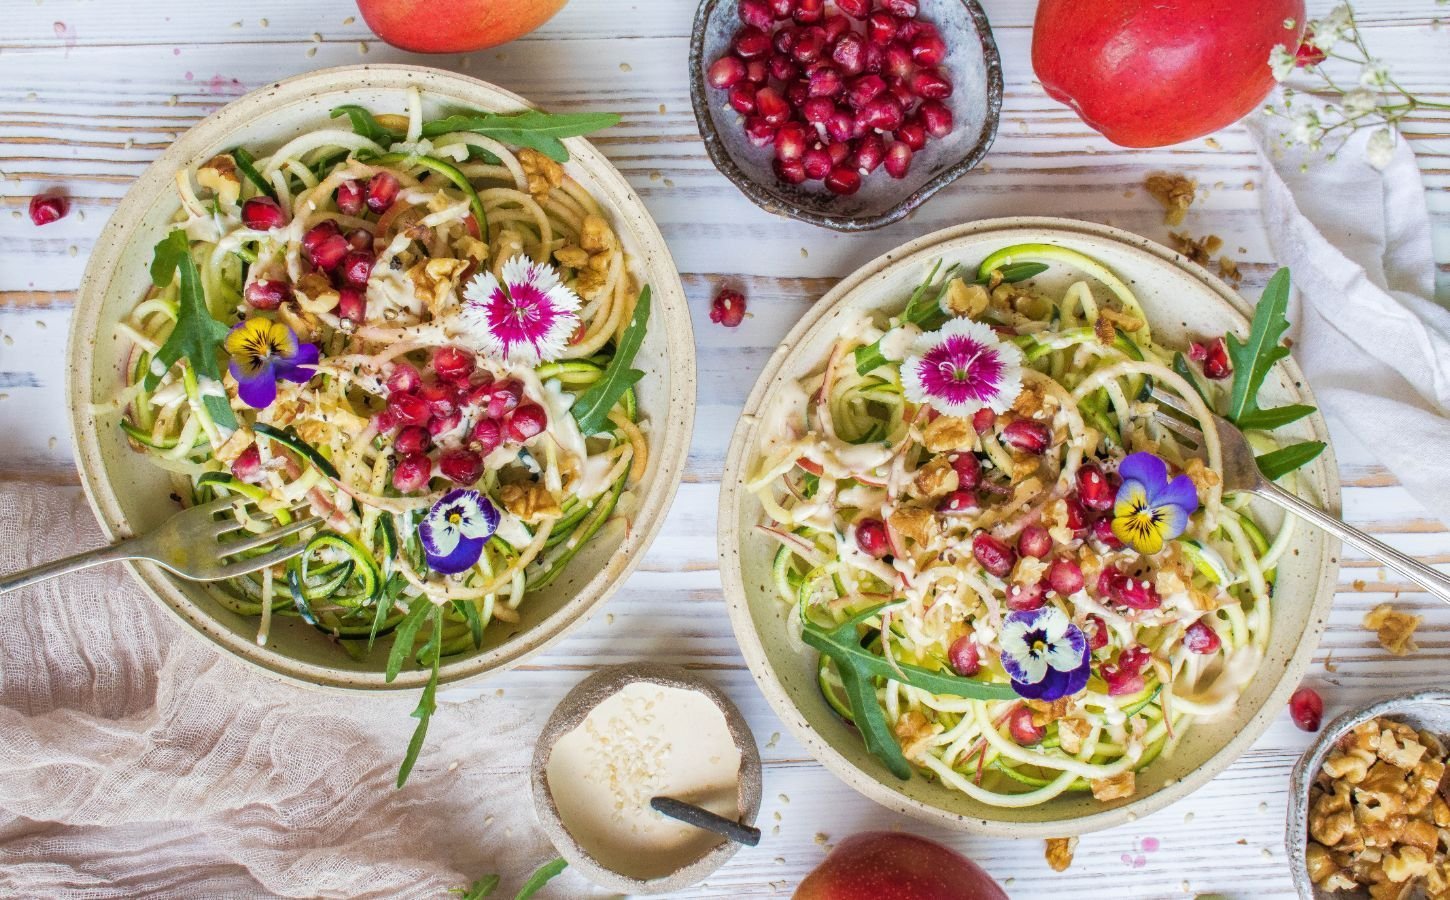 vegan courgetti, tahini, and apple salad garnished with edible flowers and pomegranate